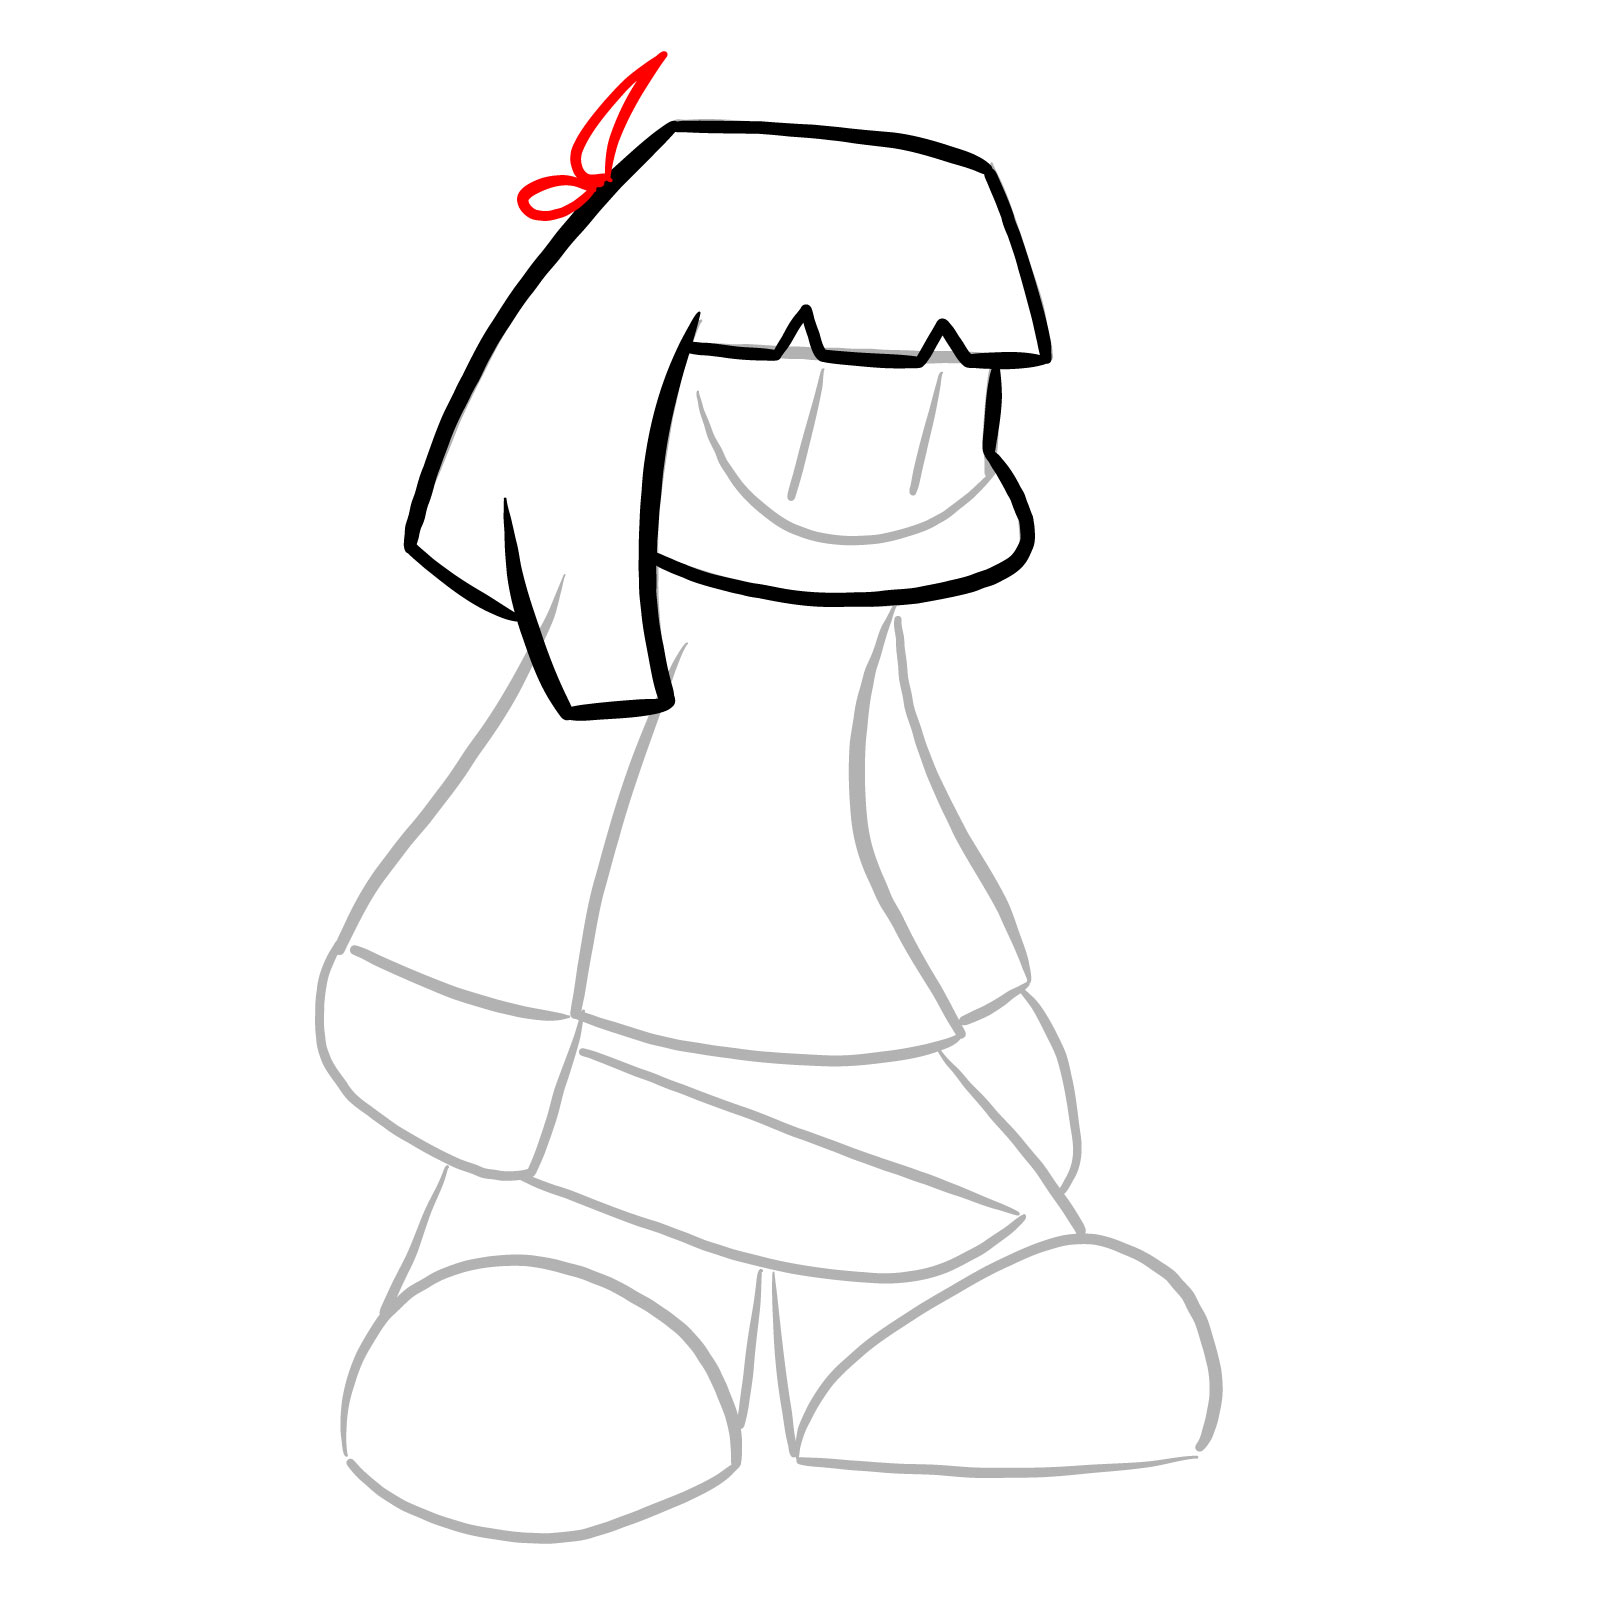 How to draw Chara from Friday Night Dustin' - step 08